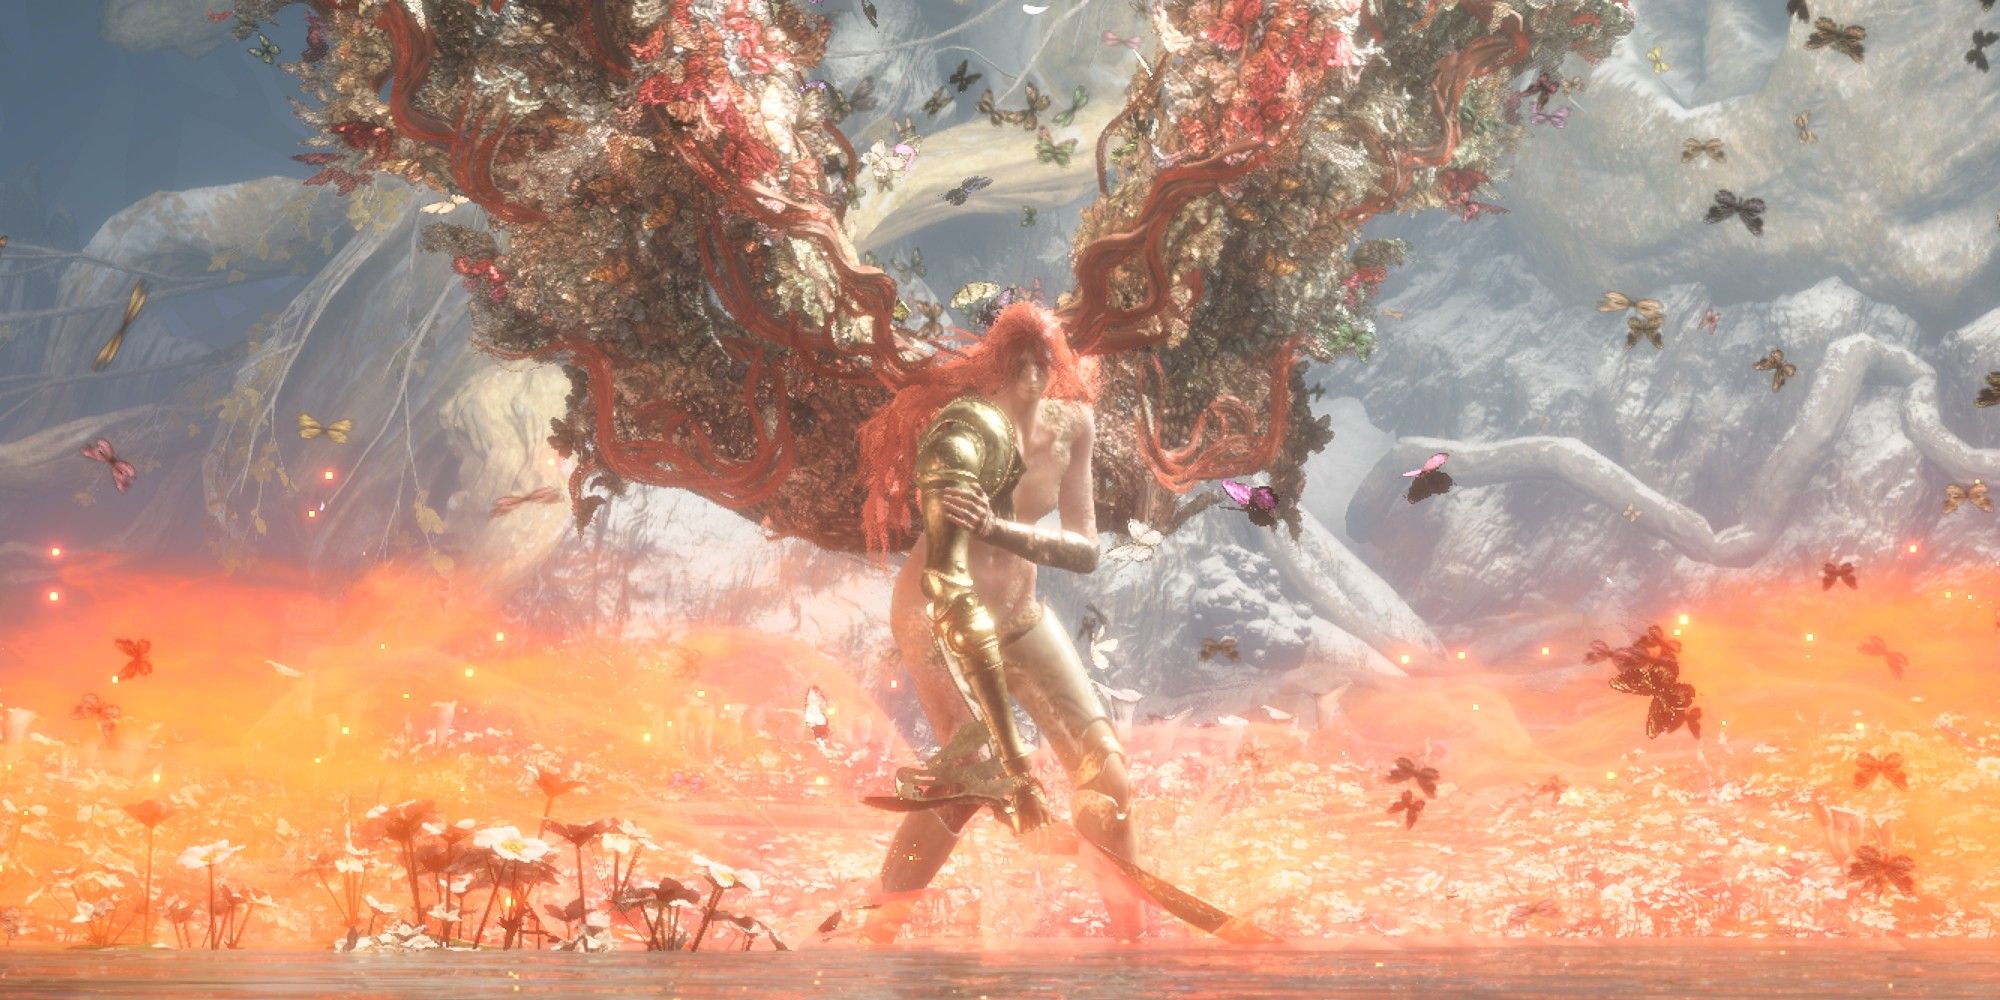 Malenia at the beginning of her second boss fight phase - having just turned into the Goddess of Rot, she has angel-like wings spread, and is surrounded by butterflies and the orange-red glow of the dissipating Scarlet Aeonia.